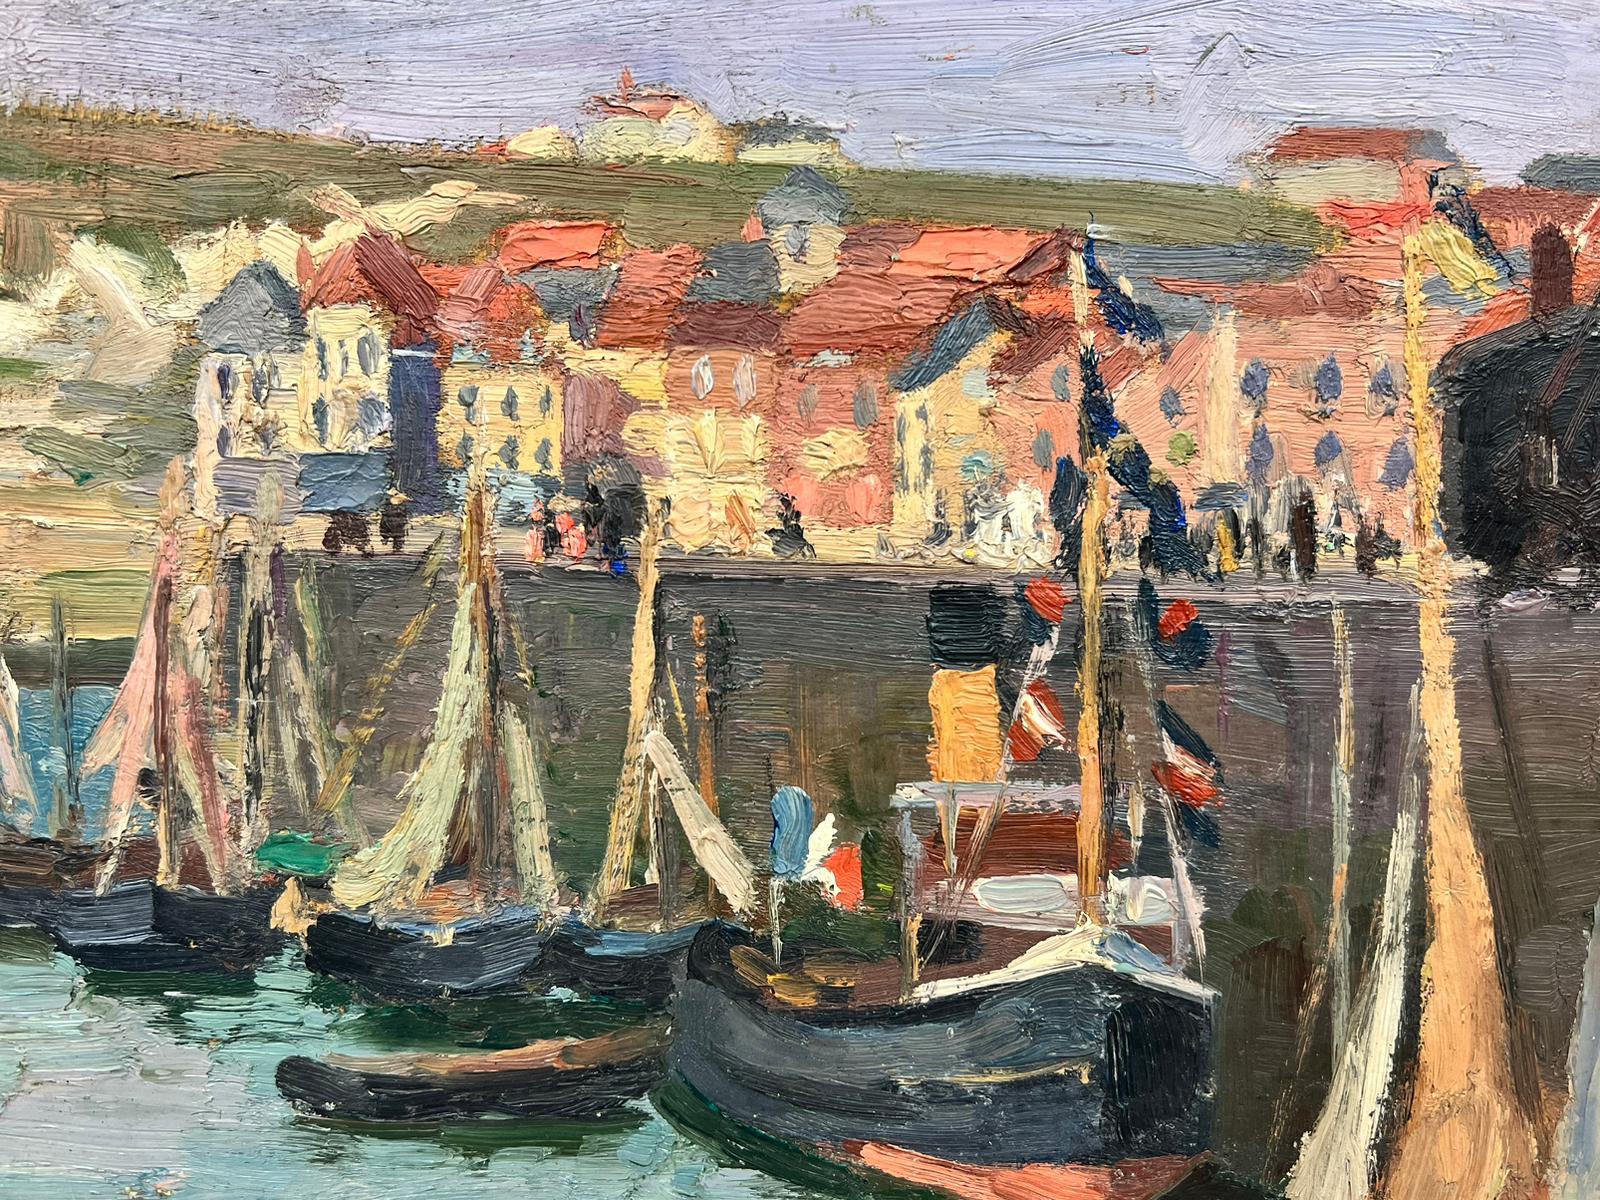 Artist/ School: Suzanne Crochet (French c. 1930), female French Impressionist artist

Title: The Fishing Harbour

Medium: oil on board, unframed 

board: 9.5 x 13 inches

Provenance: private collection, France

Condition: The painting is in overall